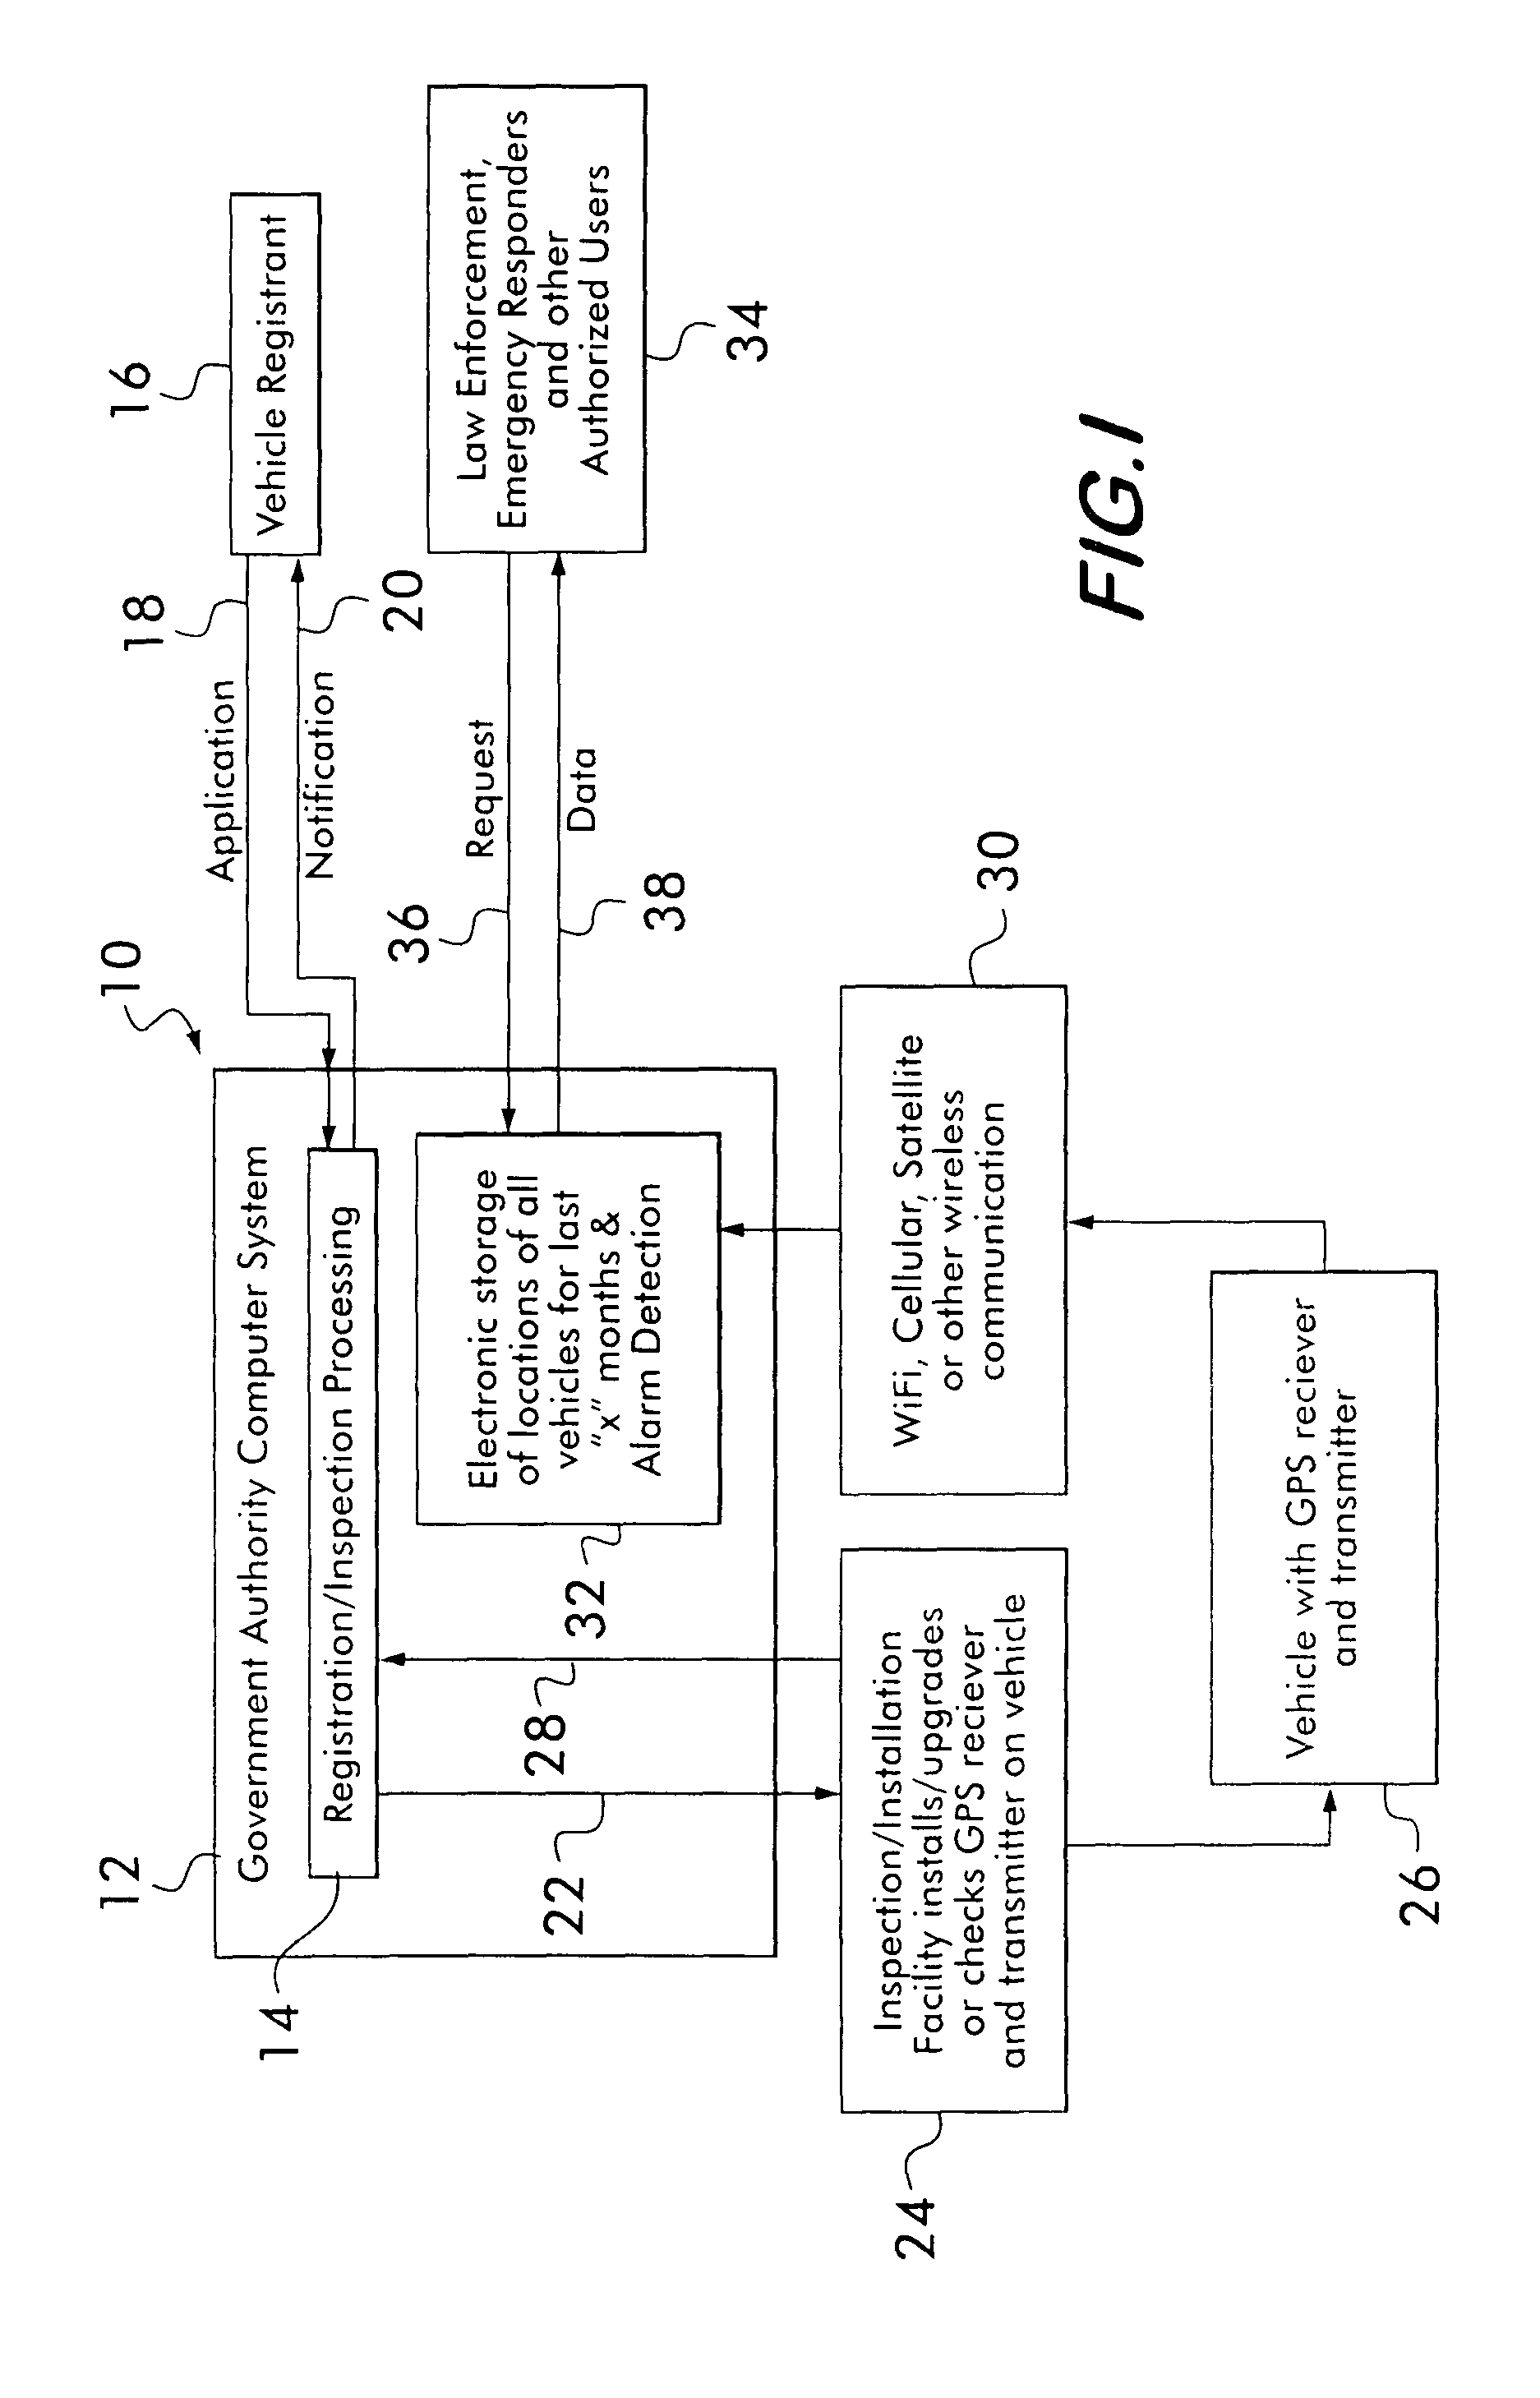 Computer system and method for statewide or other jurisdiction registering and monitoring of vehicle locations